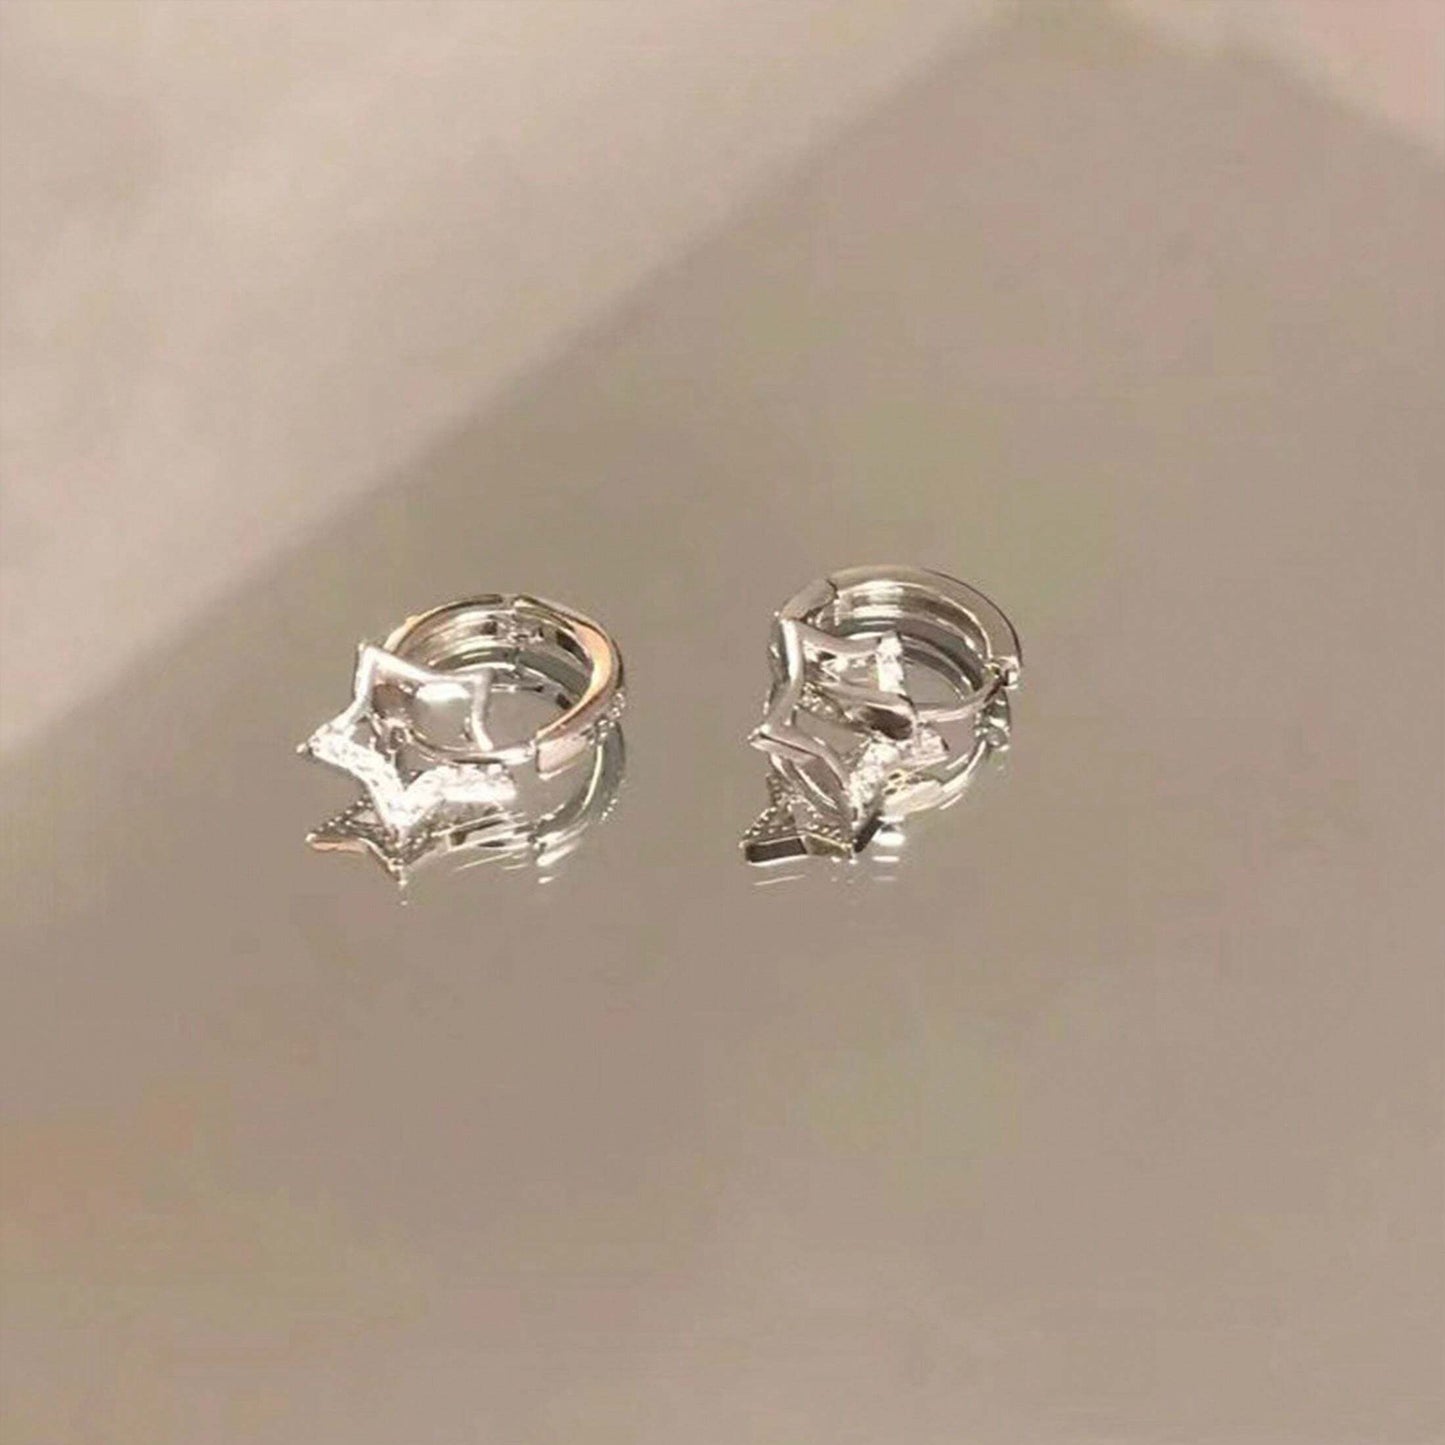 Set of 2 New Arrivals Sparkly CZ Star Design Ear Clips and Stud Earrings for Women, Hypoallergenic & Delicate.